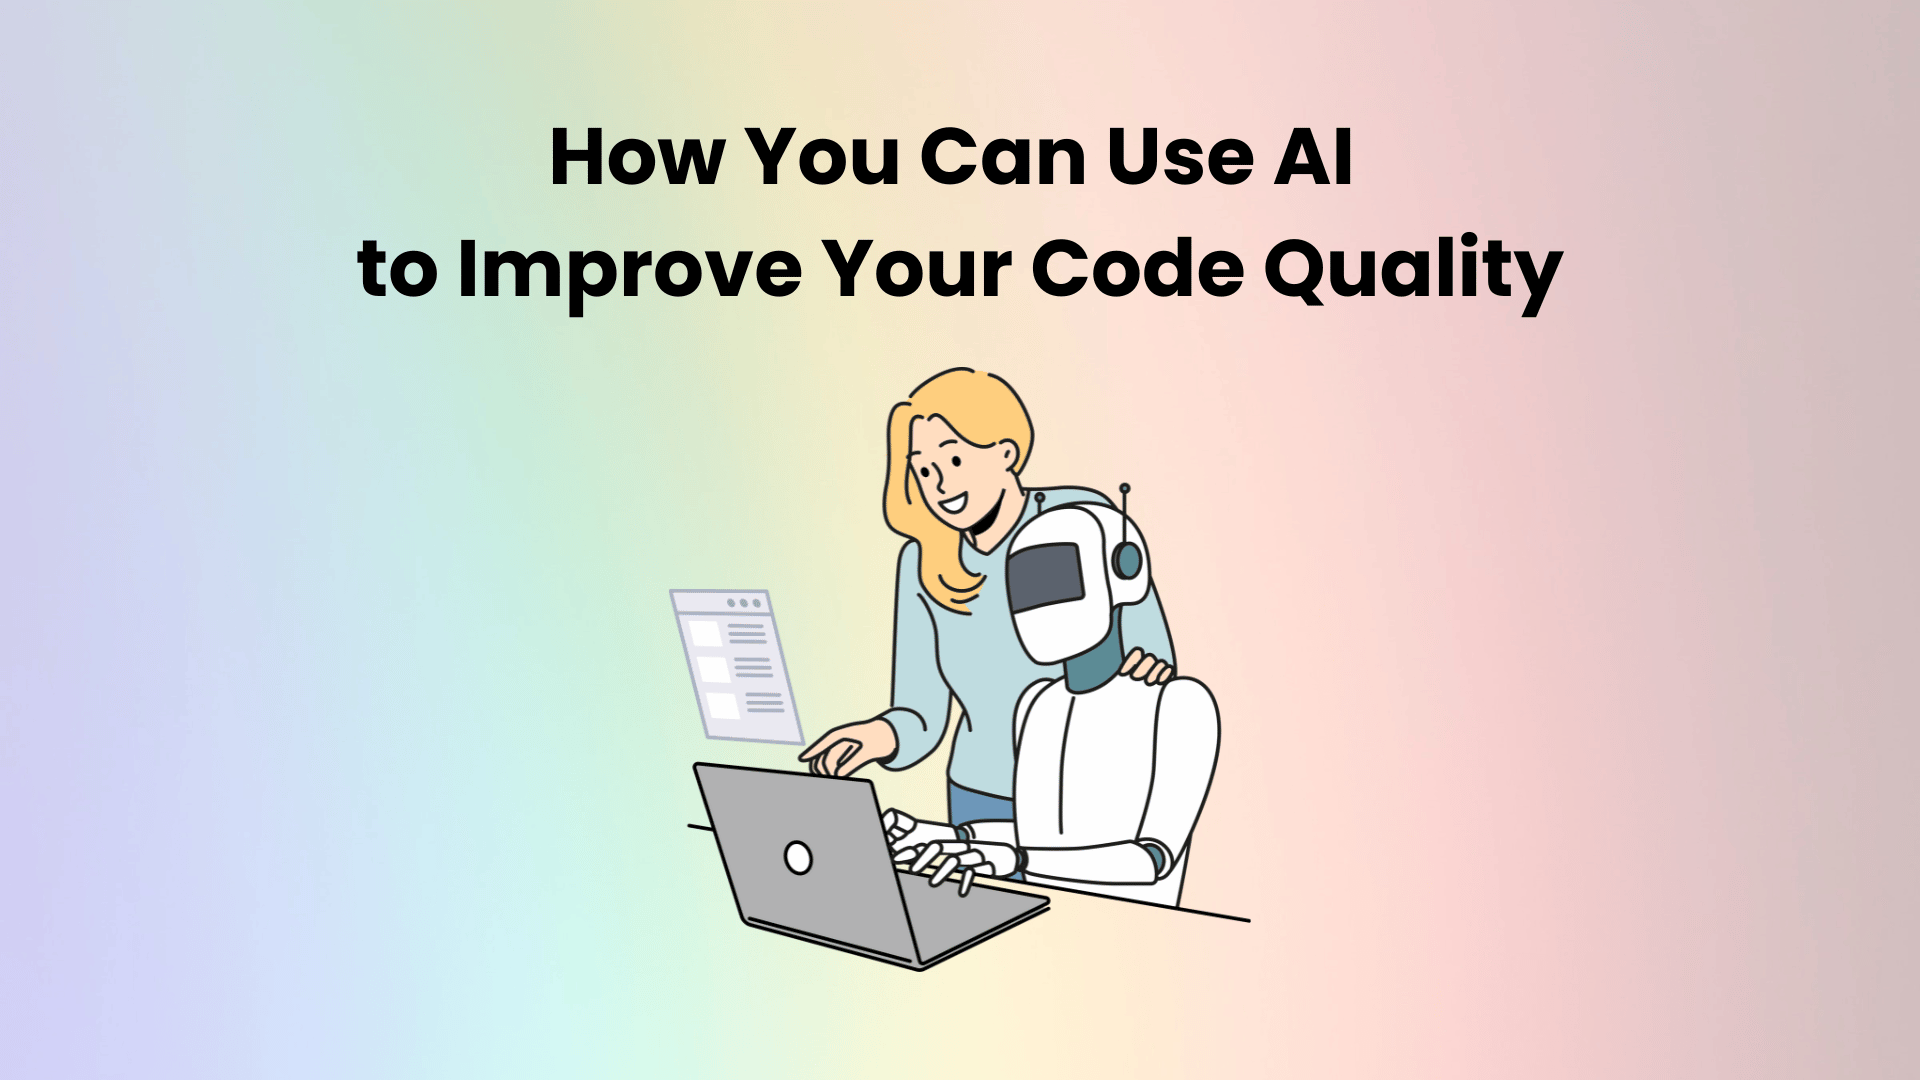 How You Can Use AI to Improve Your Code Quality